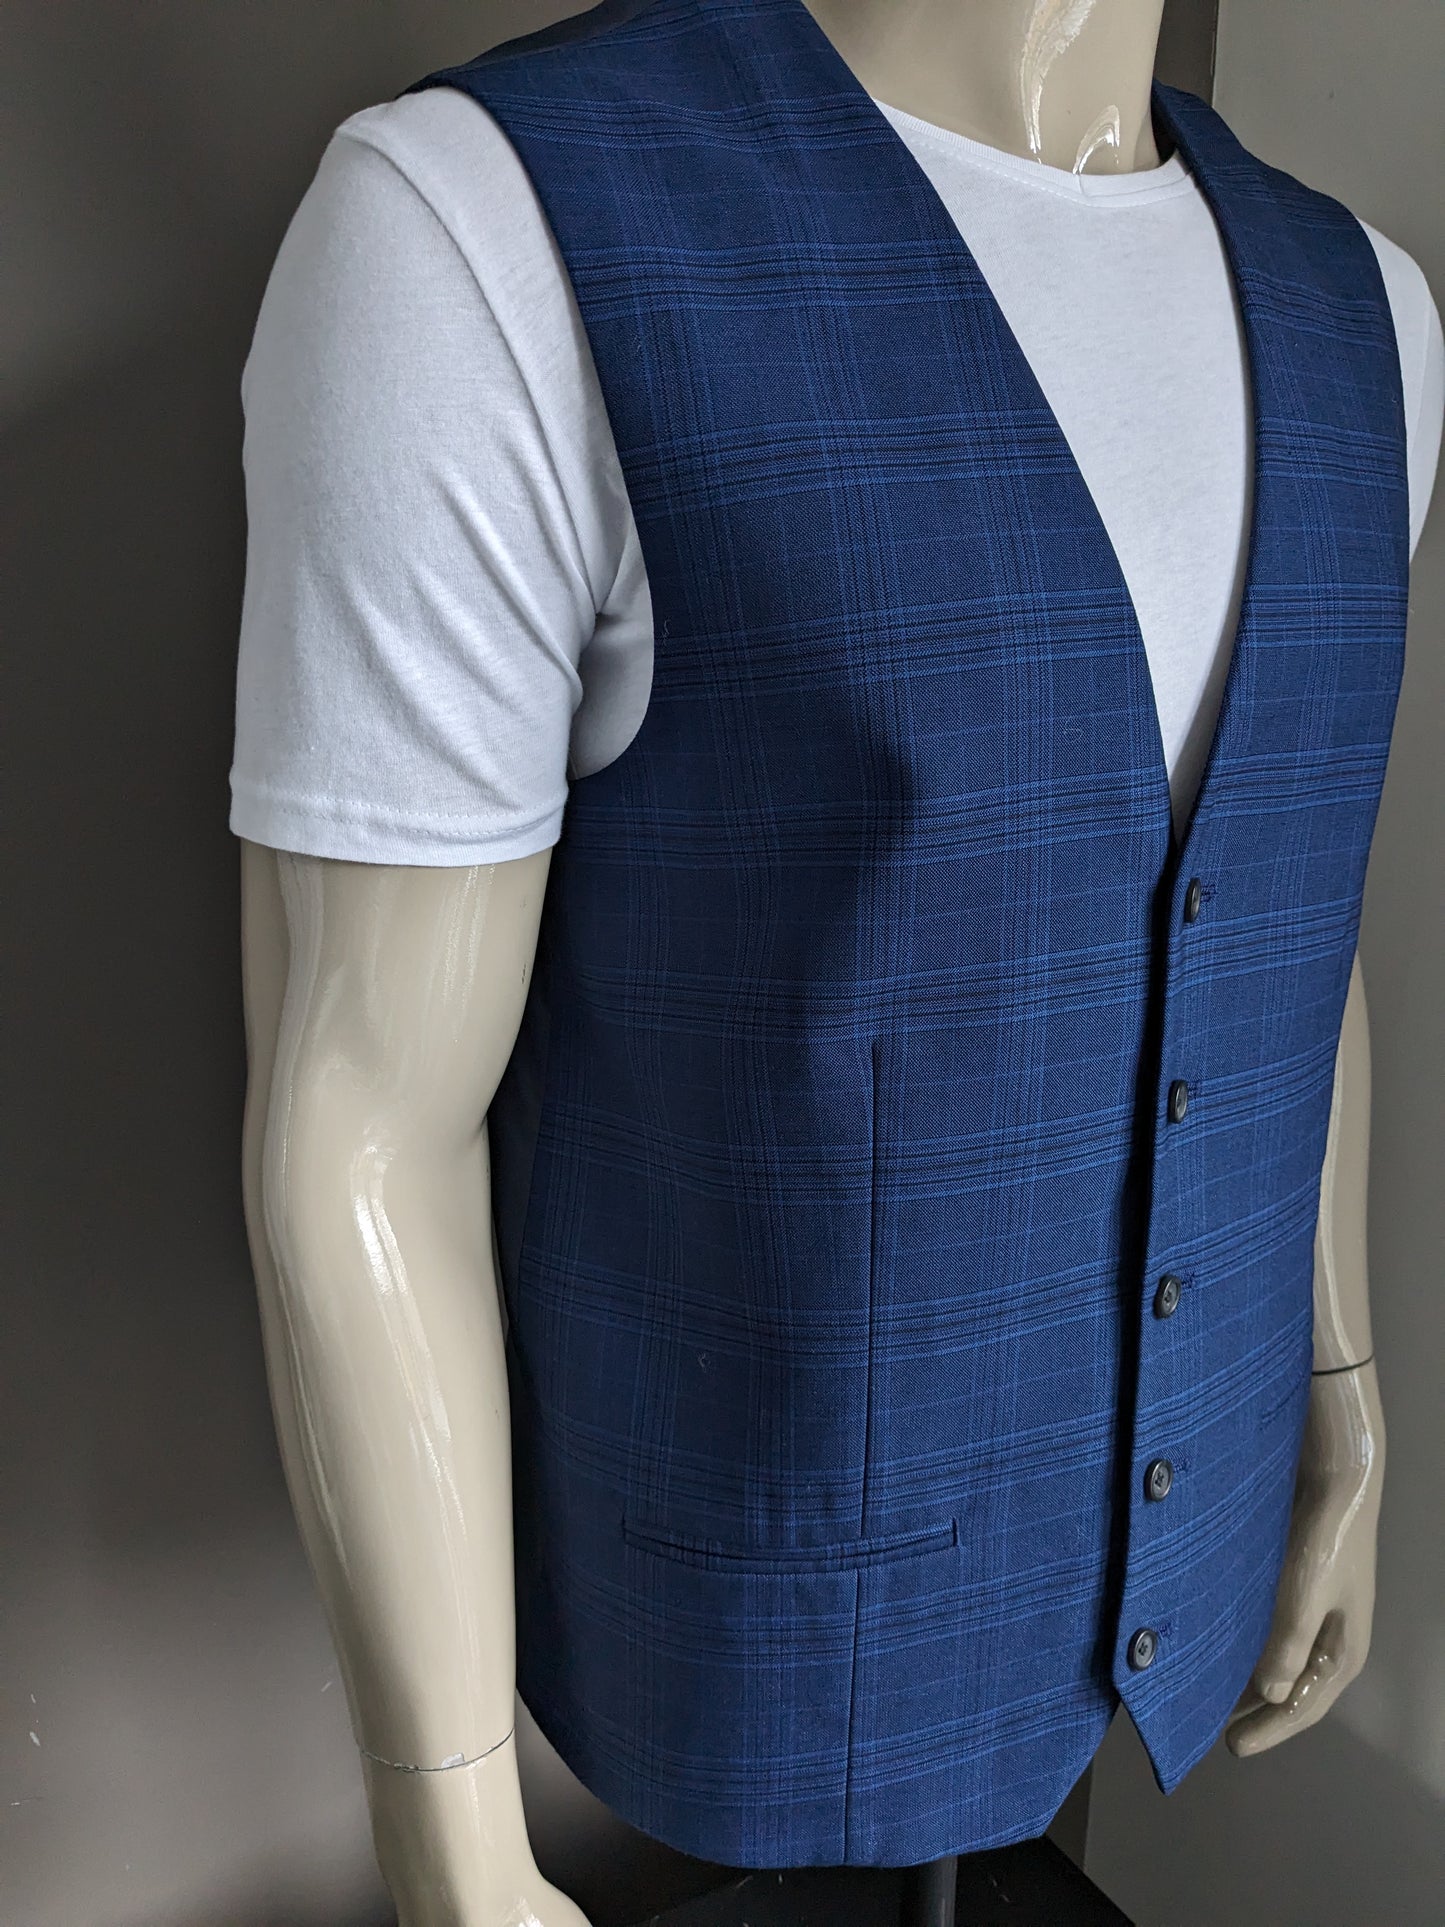 Next tailoring waistcoat. Blue black checked. Size 54 / L.